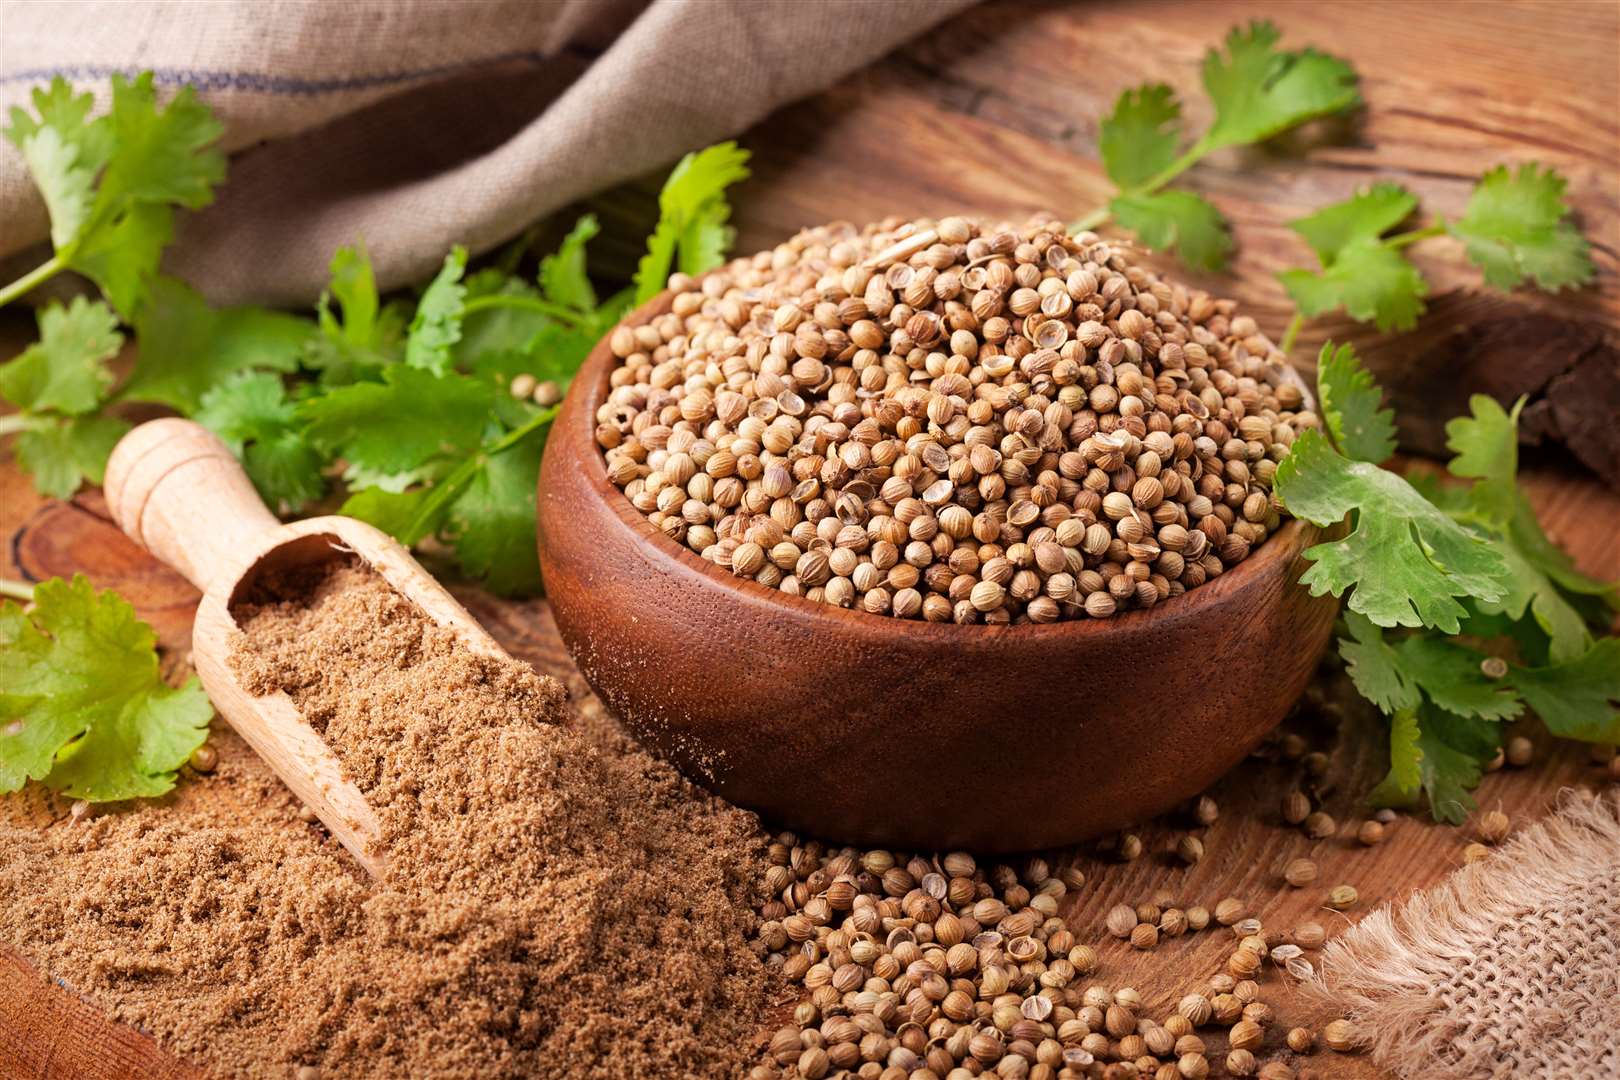 Coriander is used in many forms.